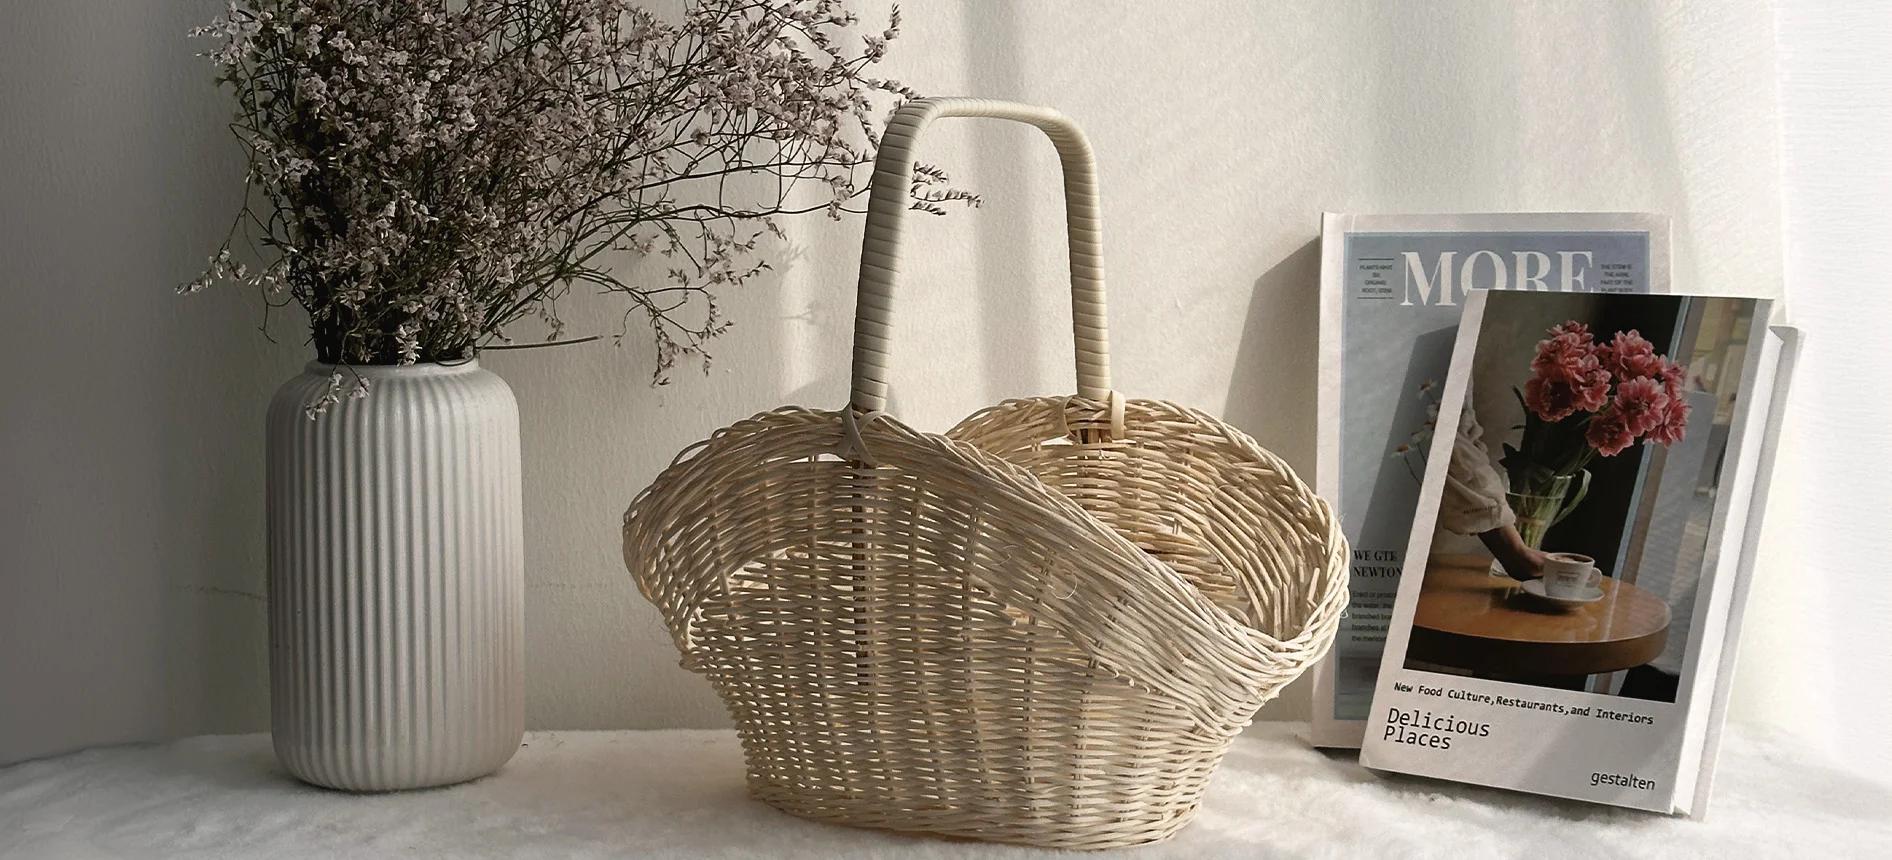 Good quality baskets Can be used to organize items in many ways as desired.